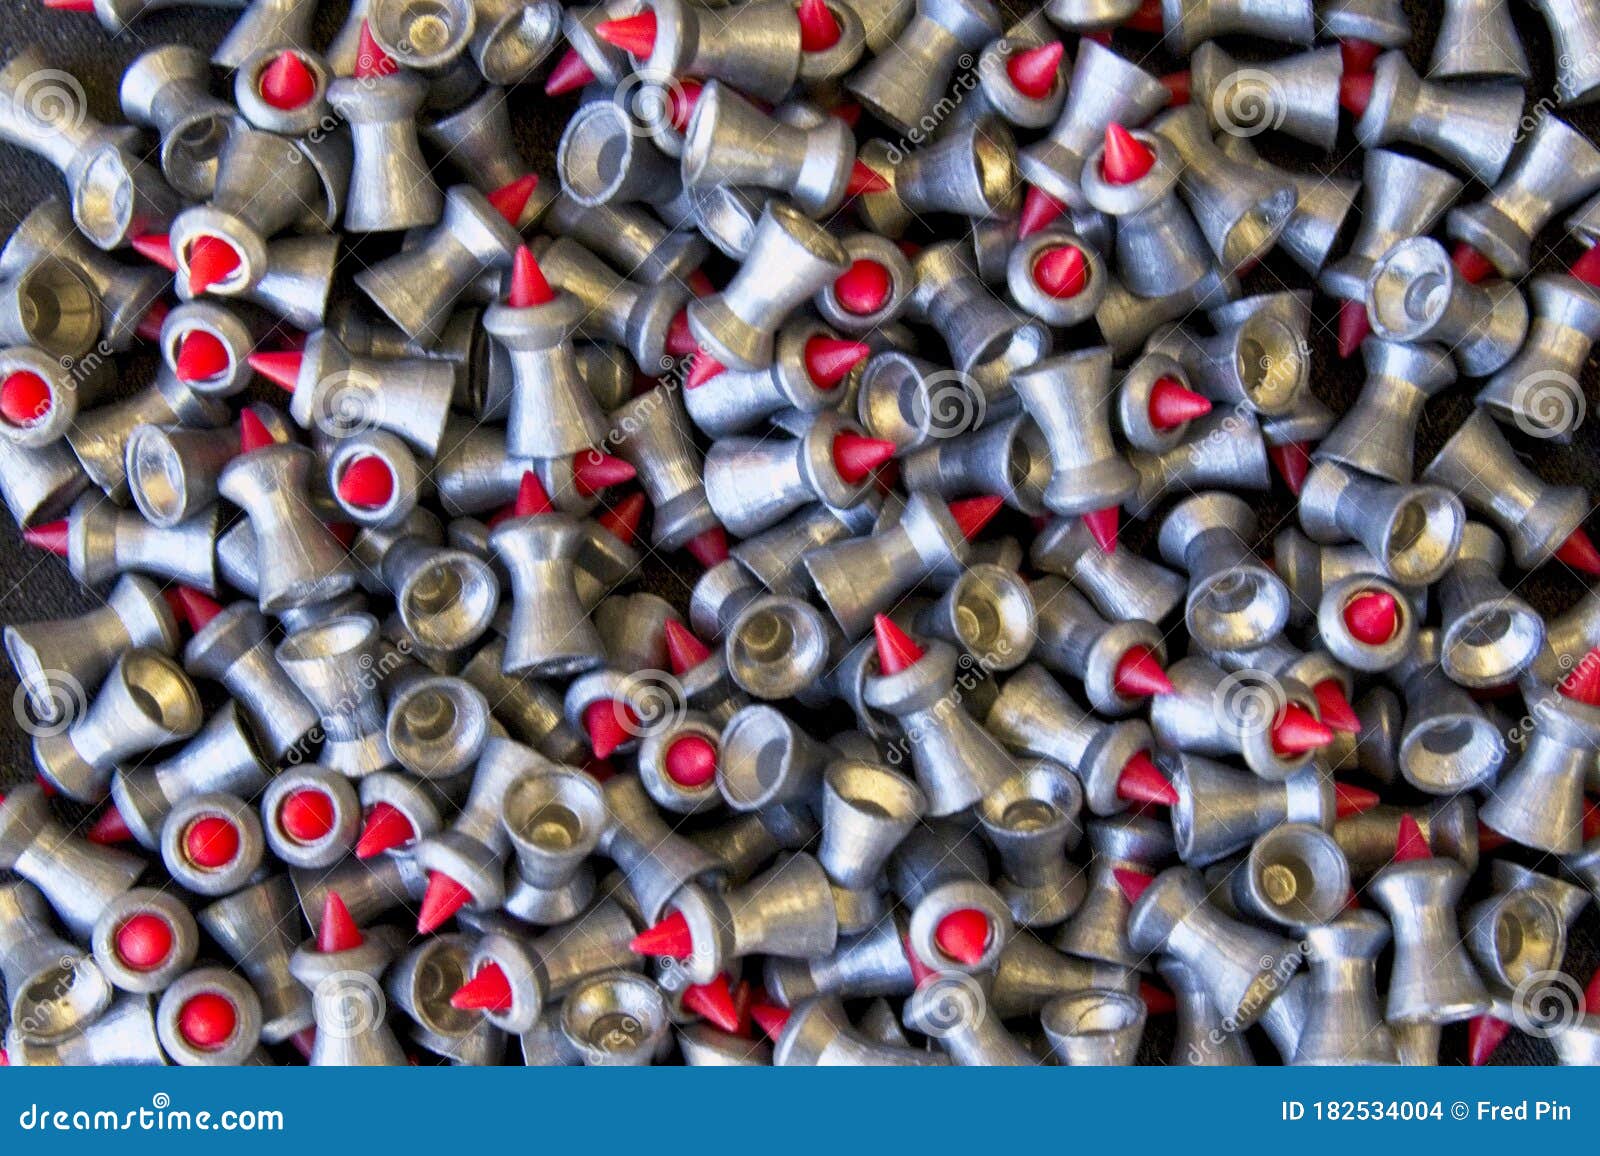 pile of .177 calibre red tipped lead air rifle pellets